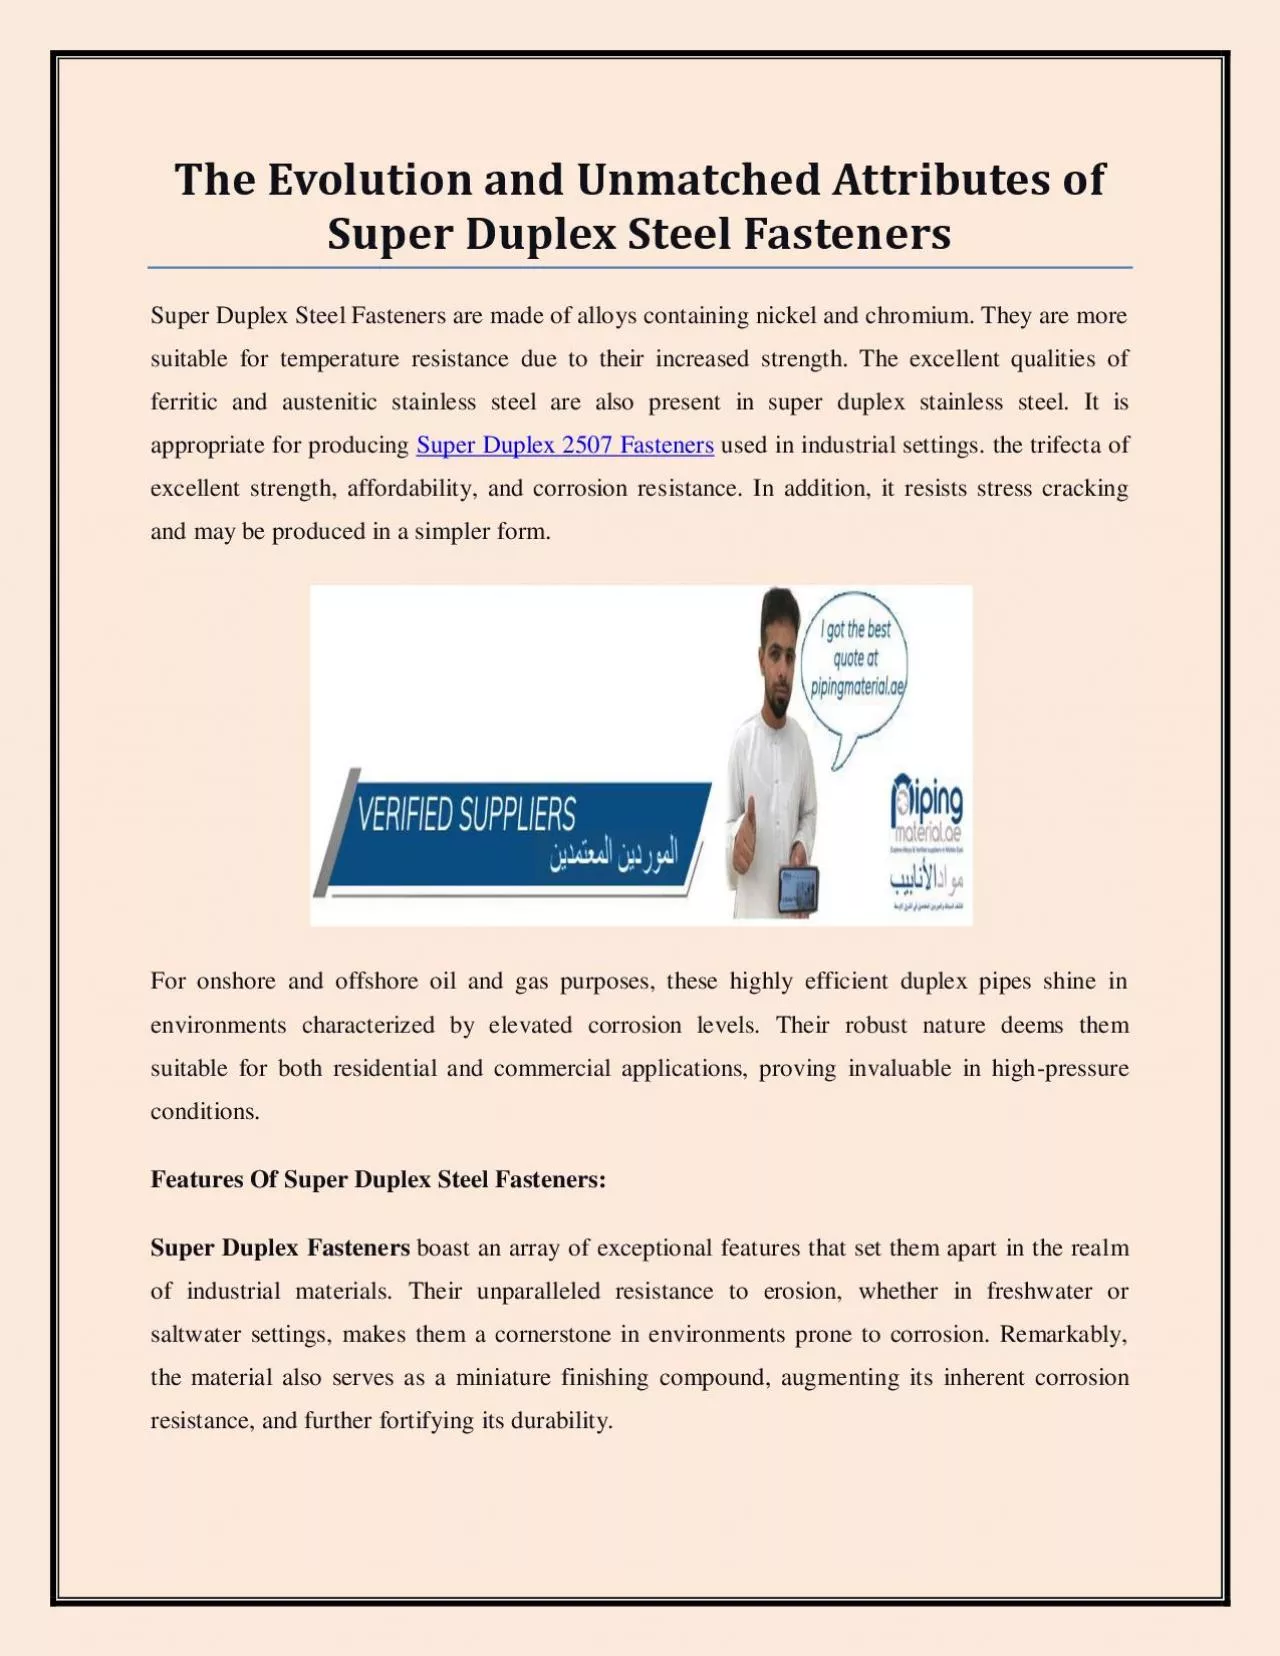 The Evolution and Unmatched Attributes of Super Duplex Steel Fasteners